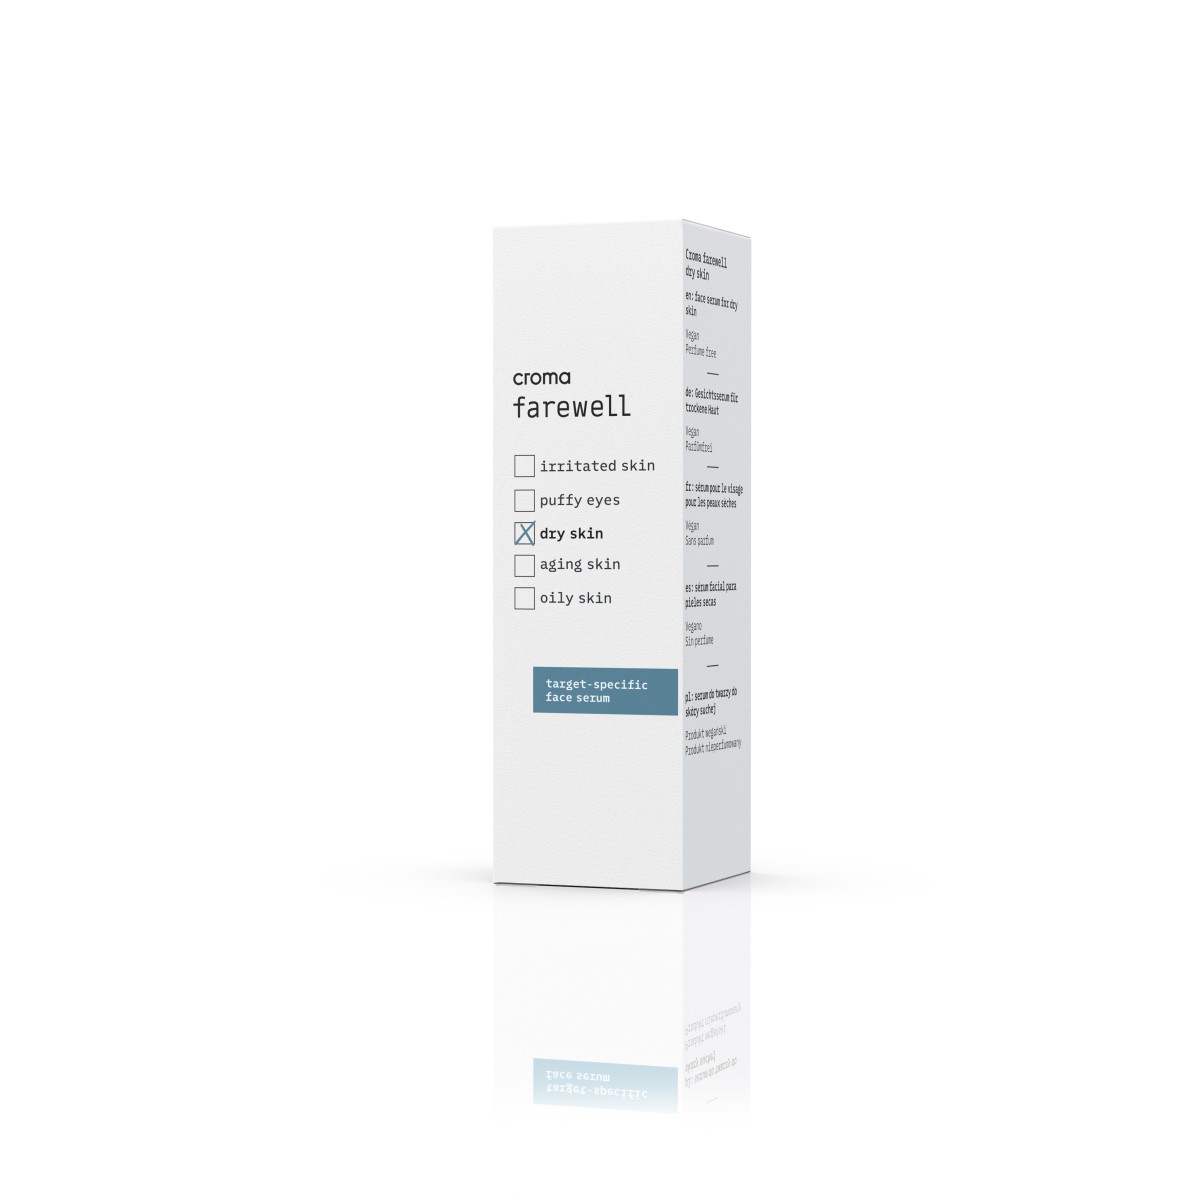 Croma farewell dry skin 5ml package sRGB